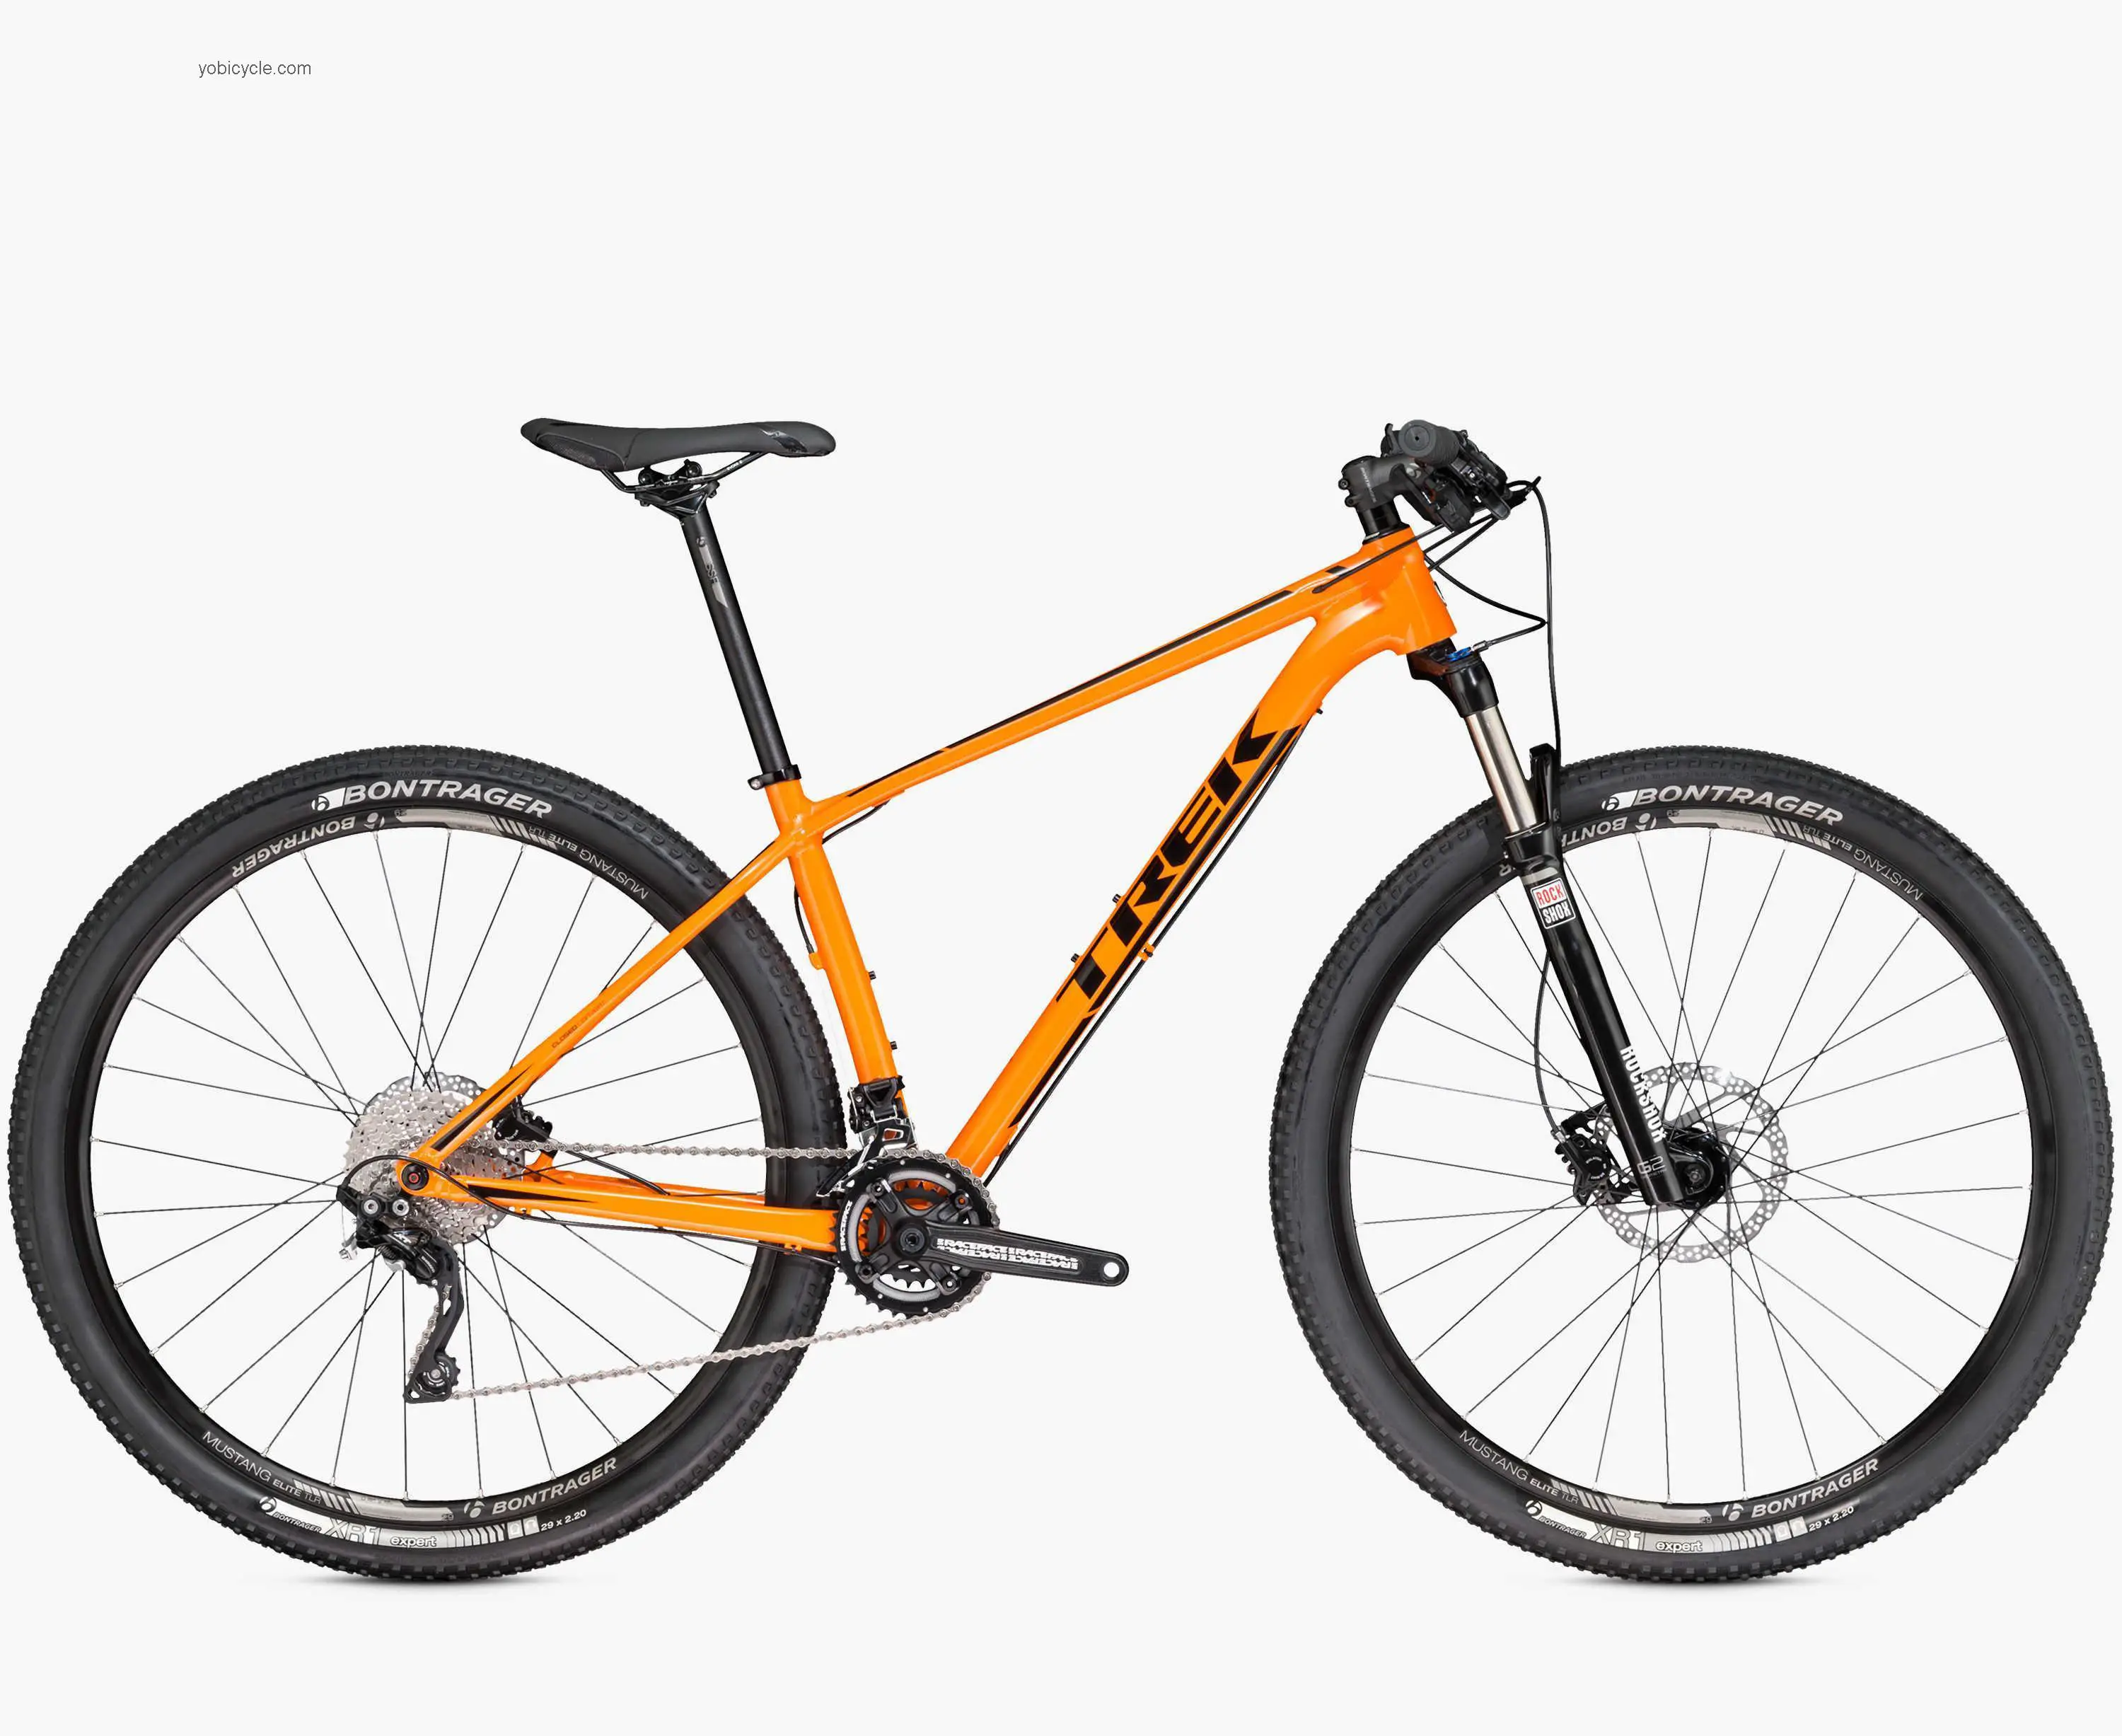 Trek Superfly 5 2016 comparison online with competitors